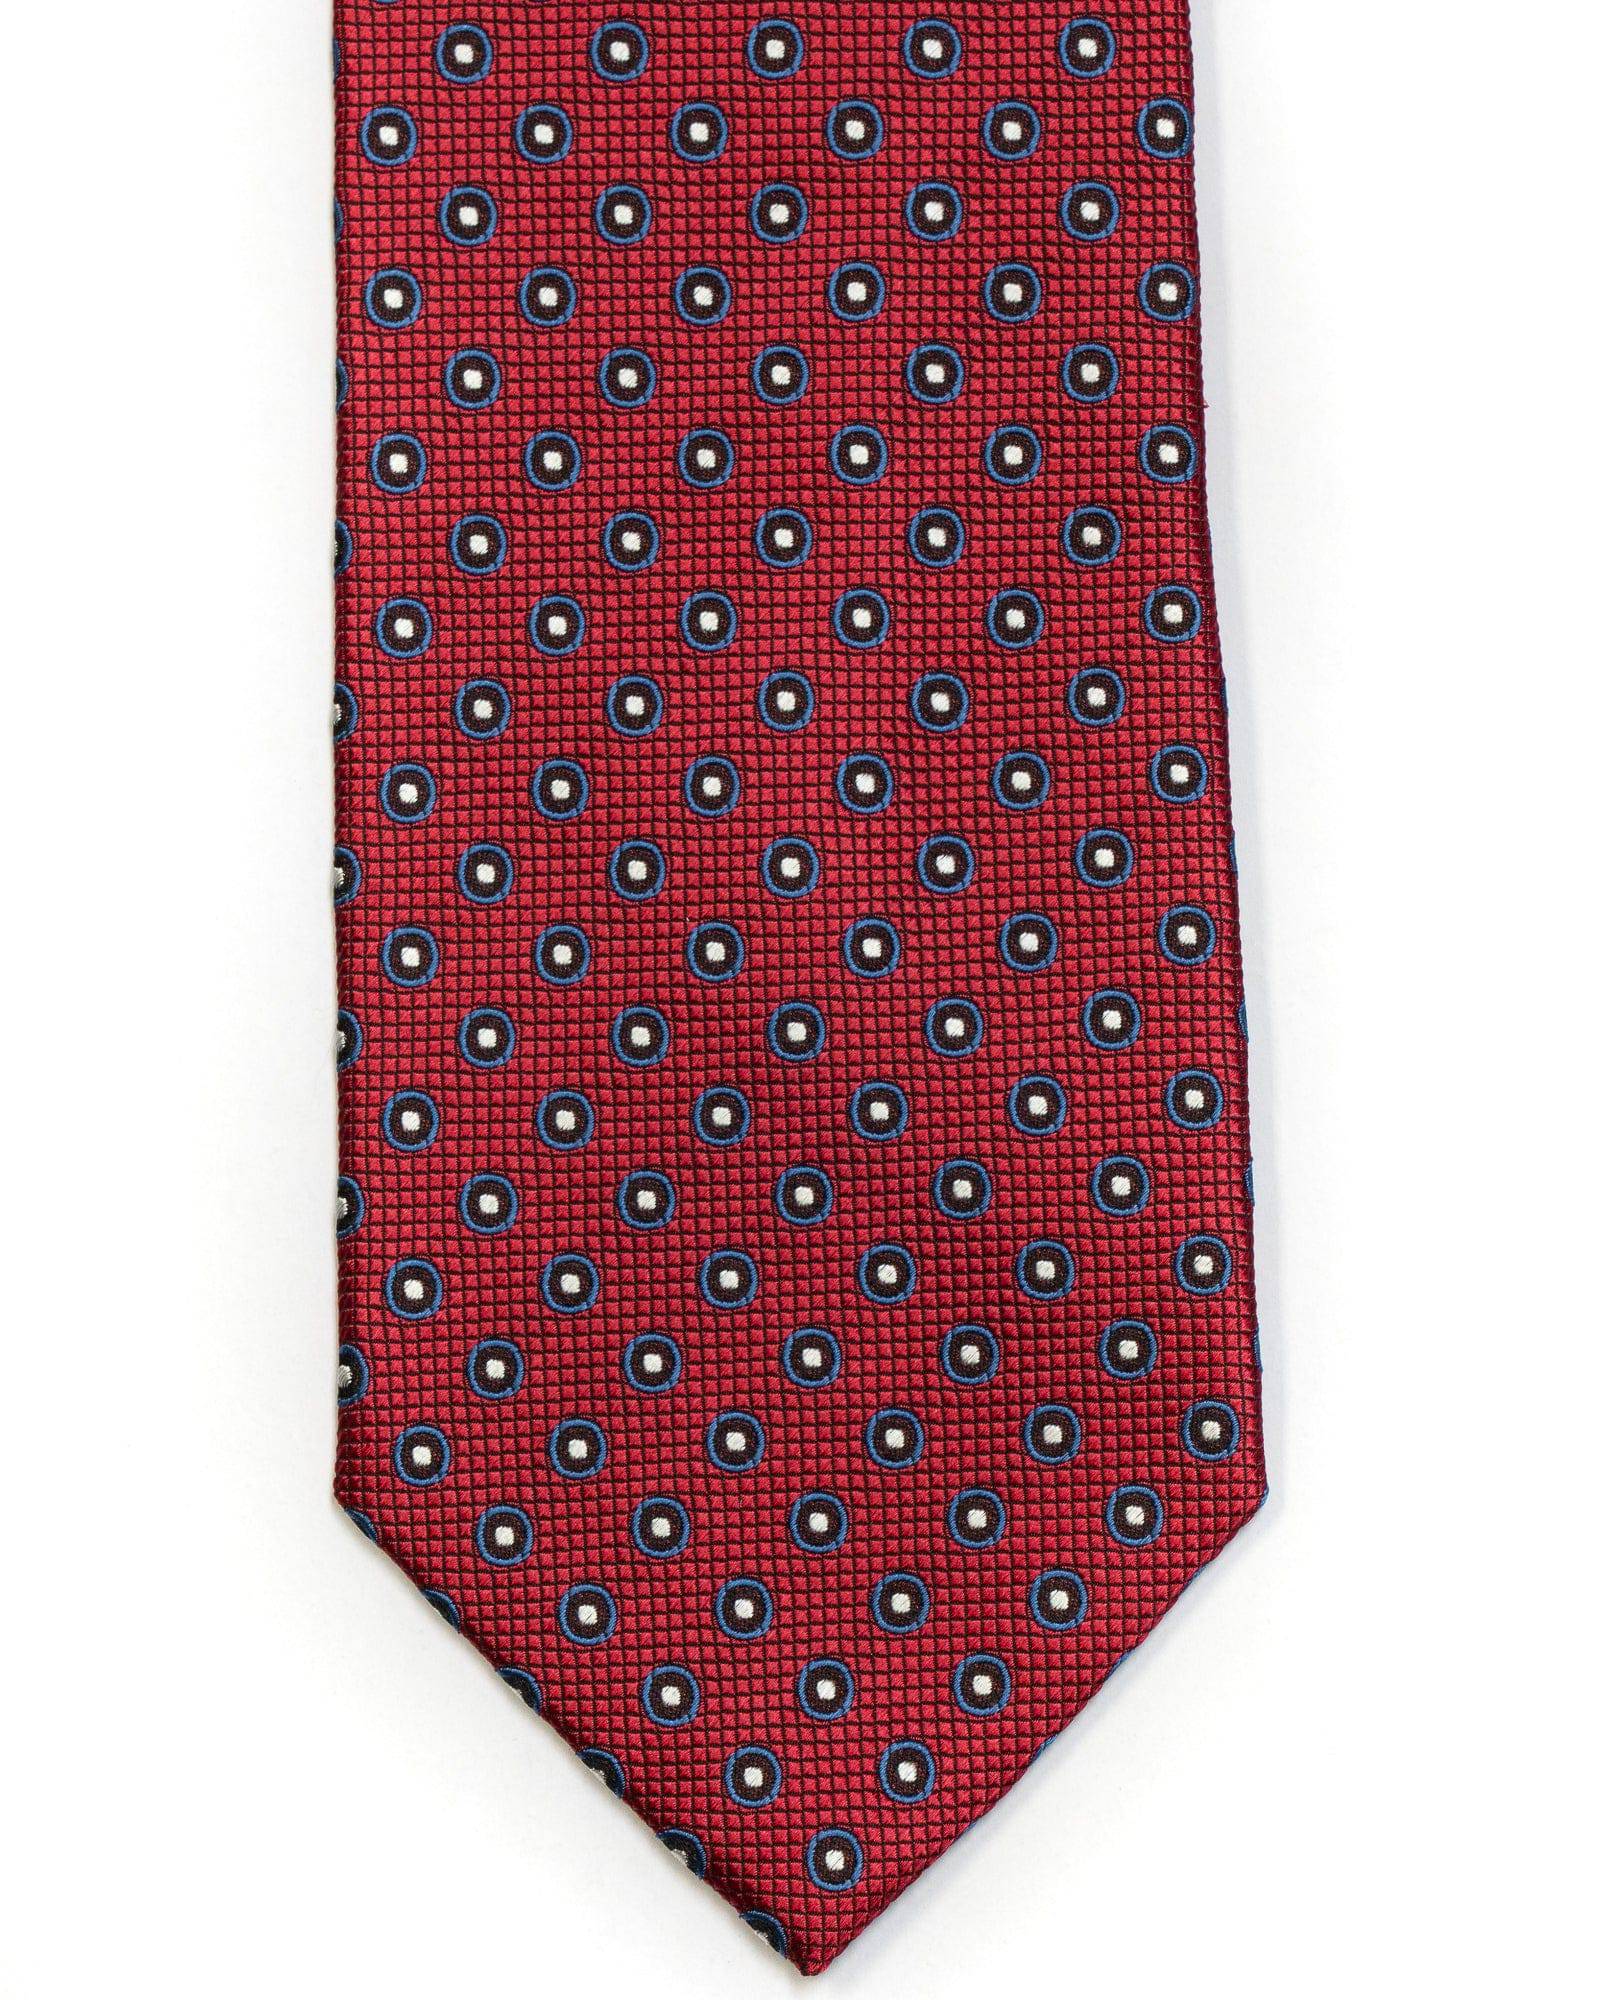 Silk Tie In Deep Red With Blue Circle Foulard Design - Rainwater's Men's Clothing and Tuxedo Rental